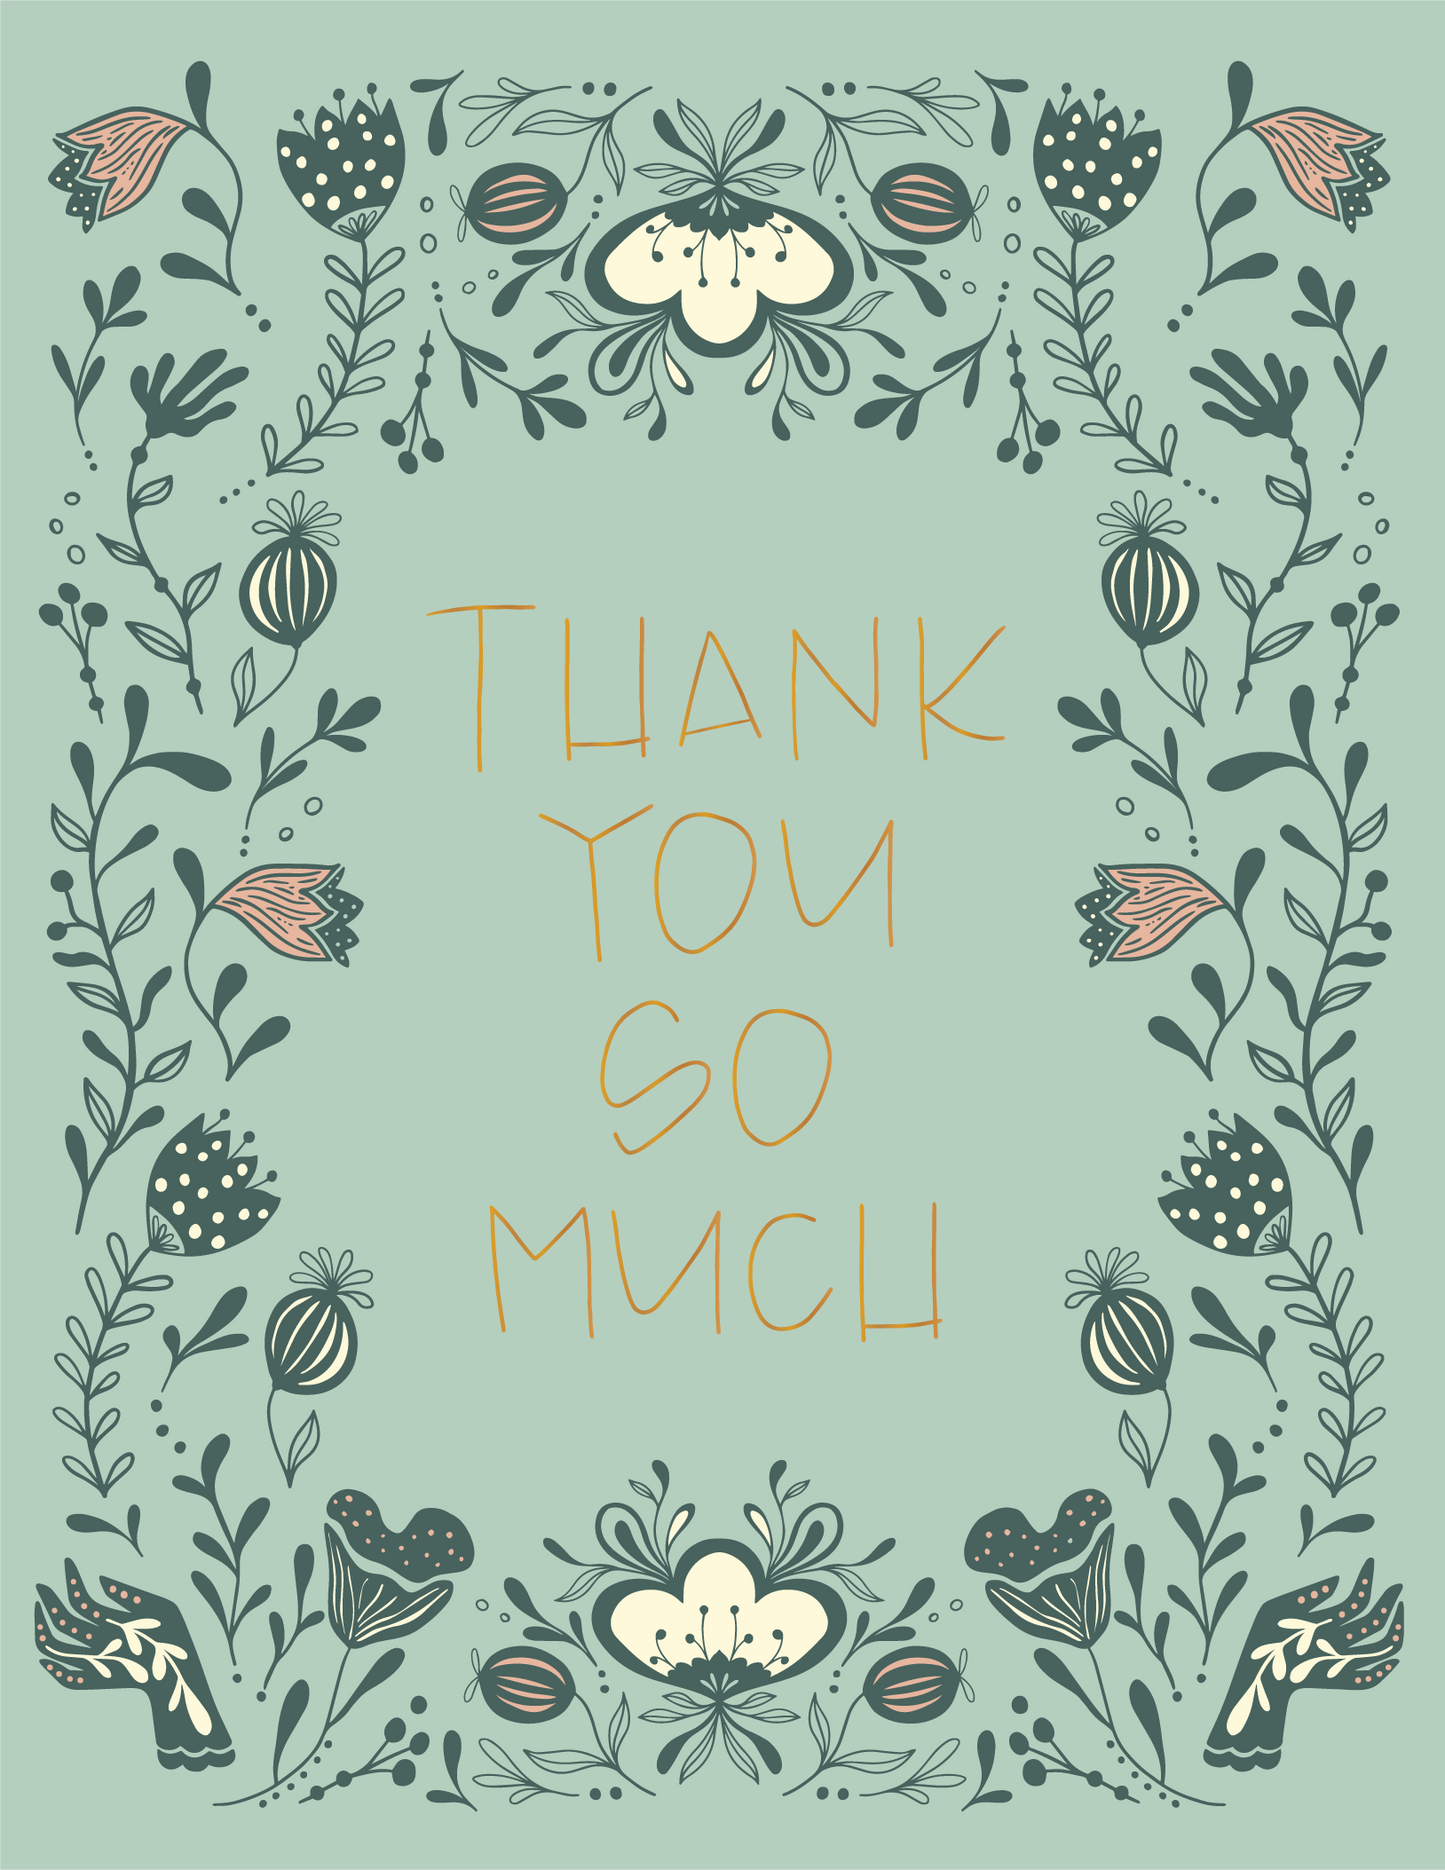 Thank You Flowers Greeting Card